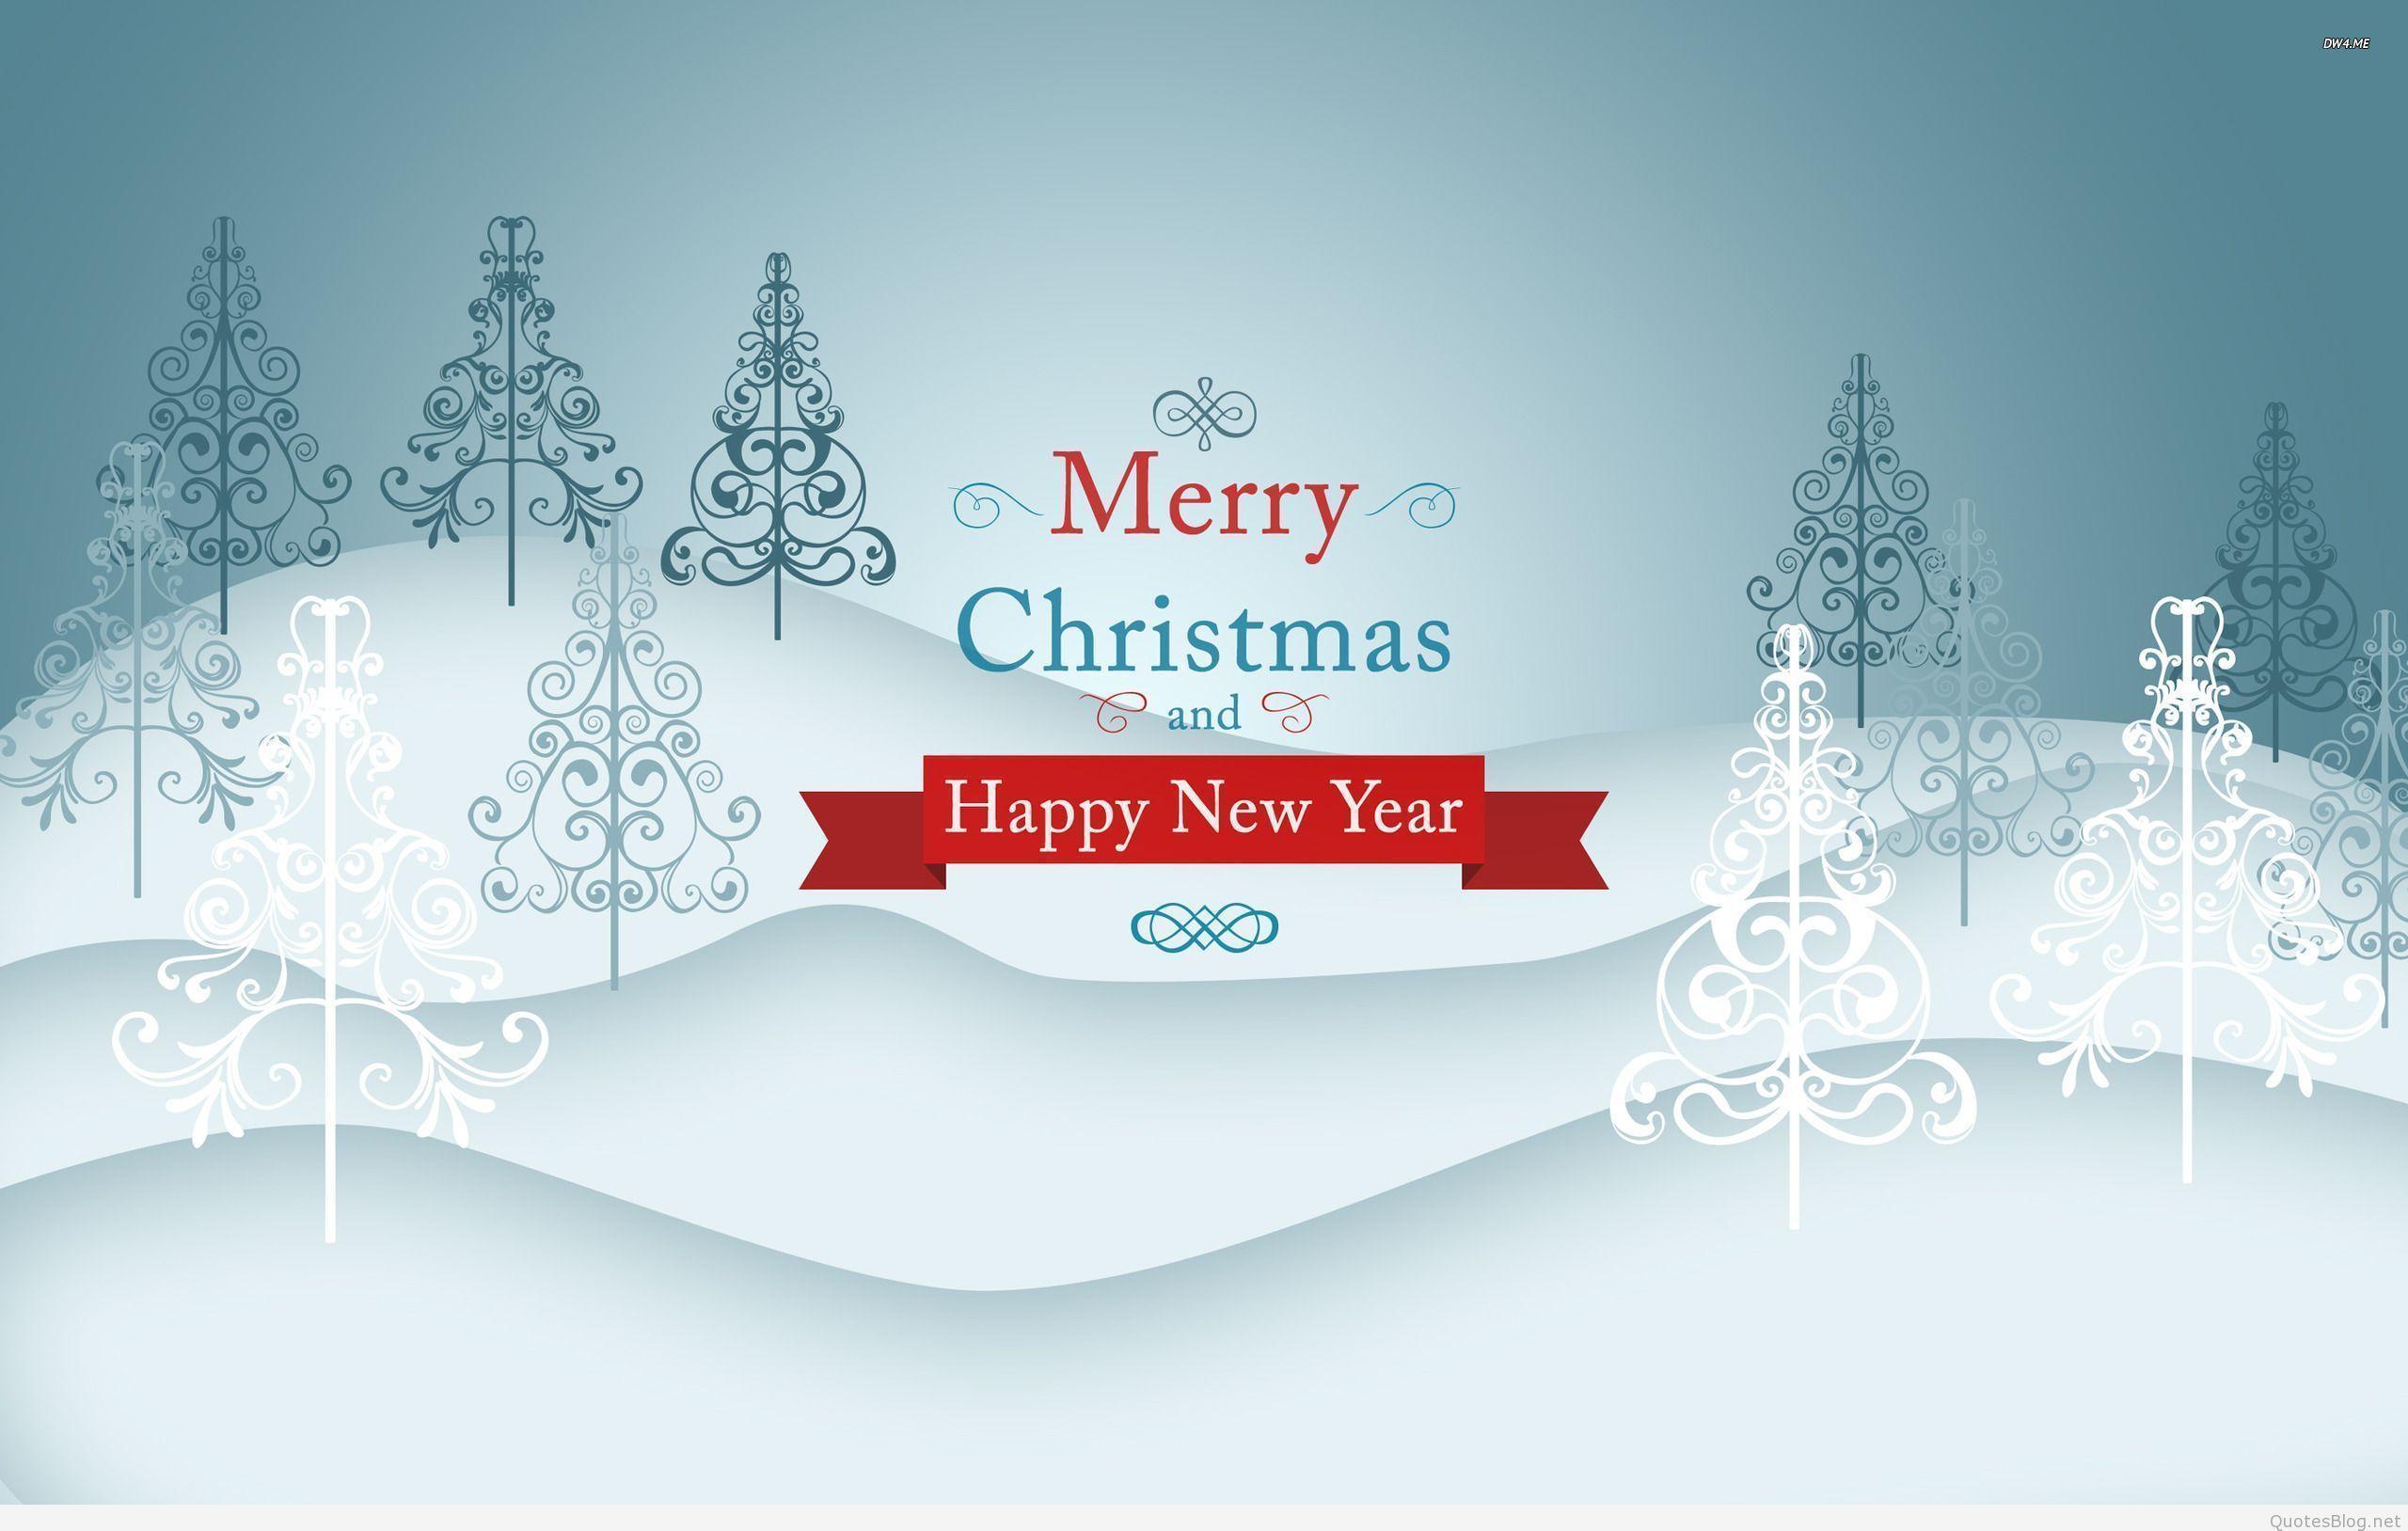 Best Merry Christmas & Happy new year quotes 2016